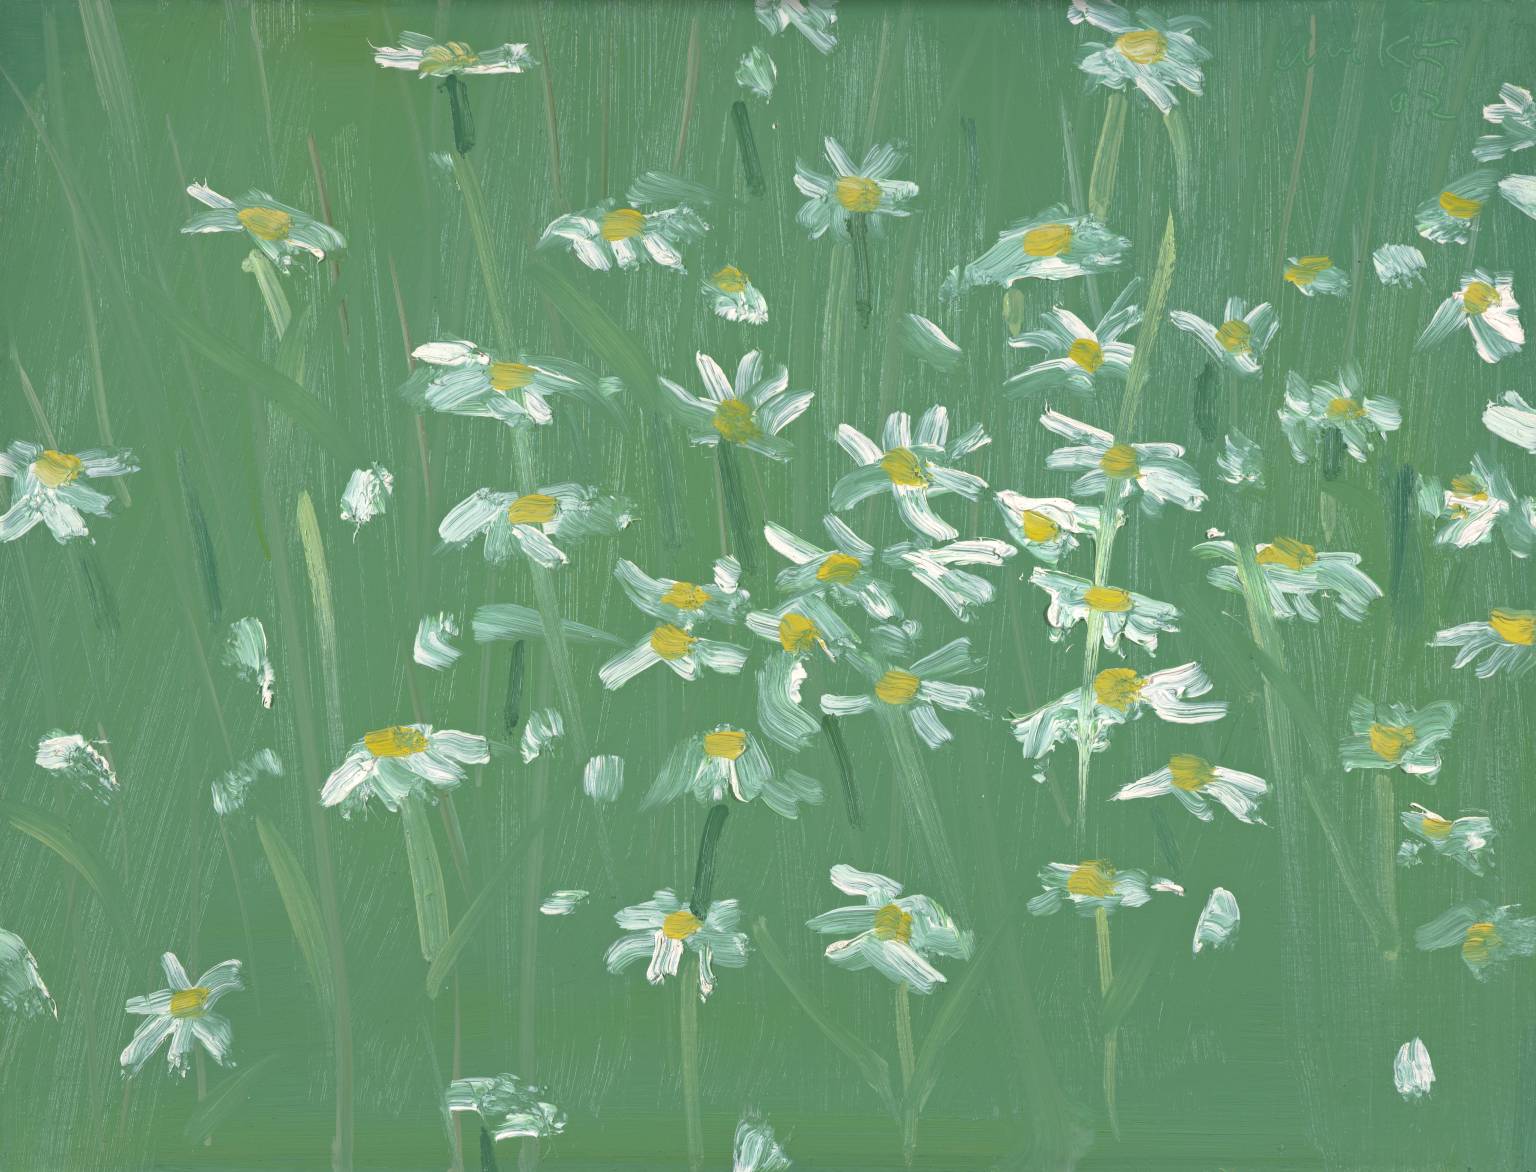 Daisies #2 by Alex Katz - Rosewood's flower art for April